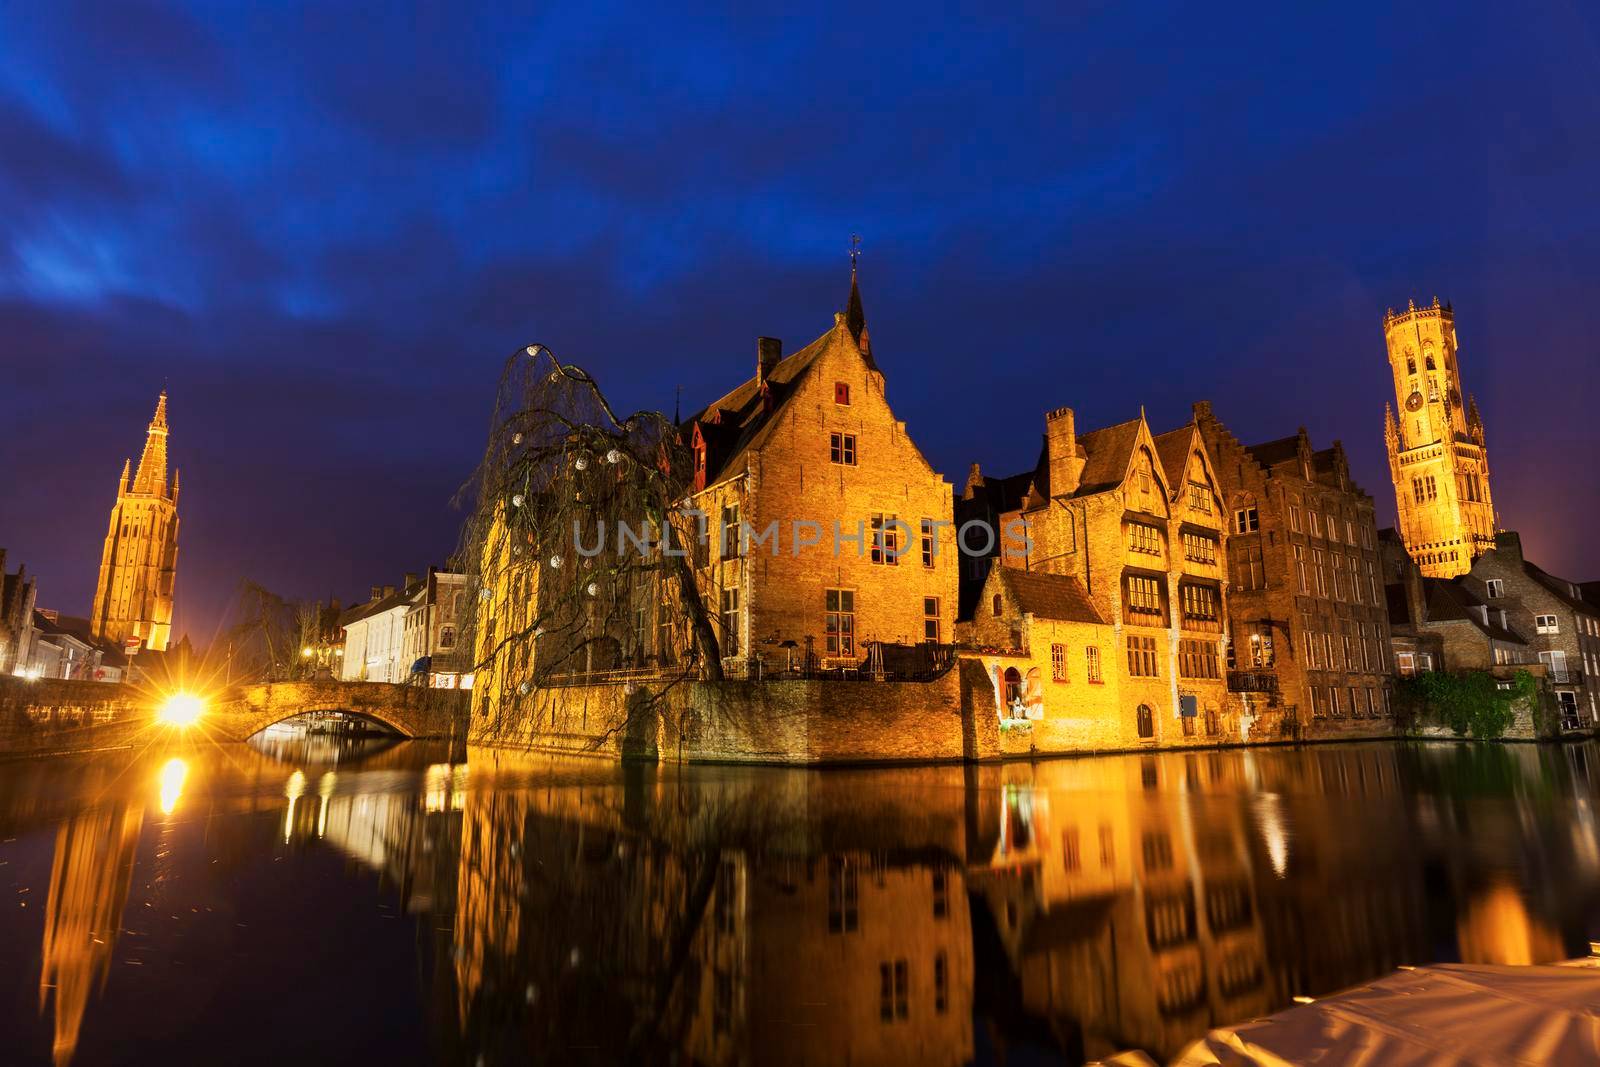 Belfry of Bruges reflected in the canal by benkrut